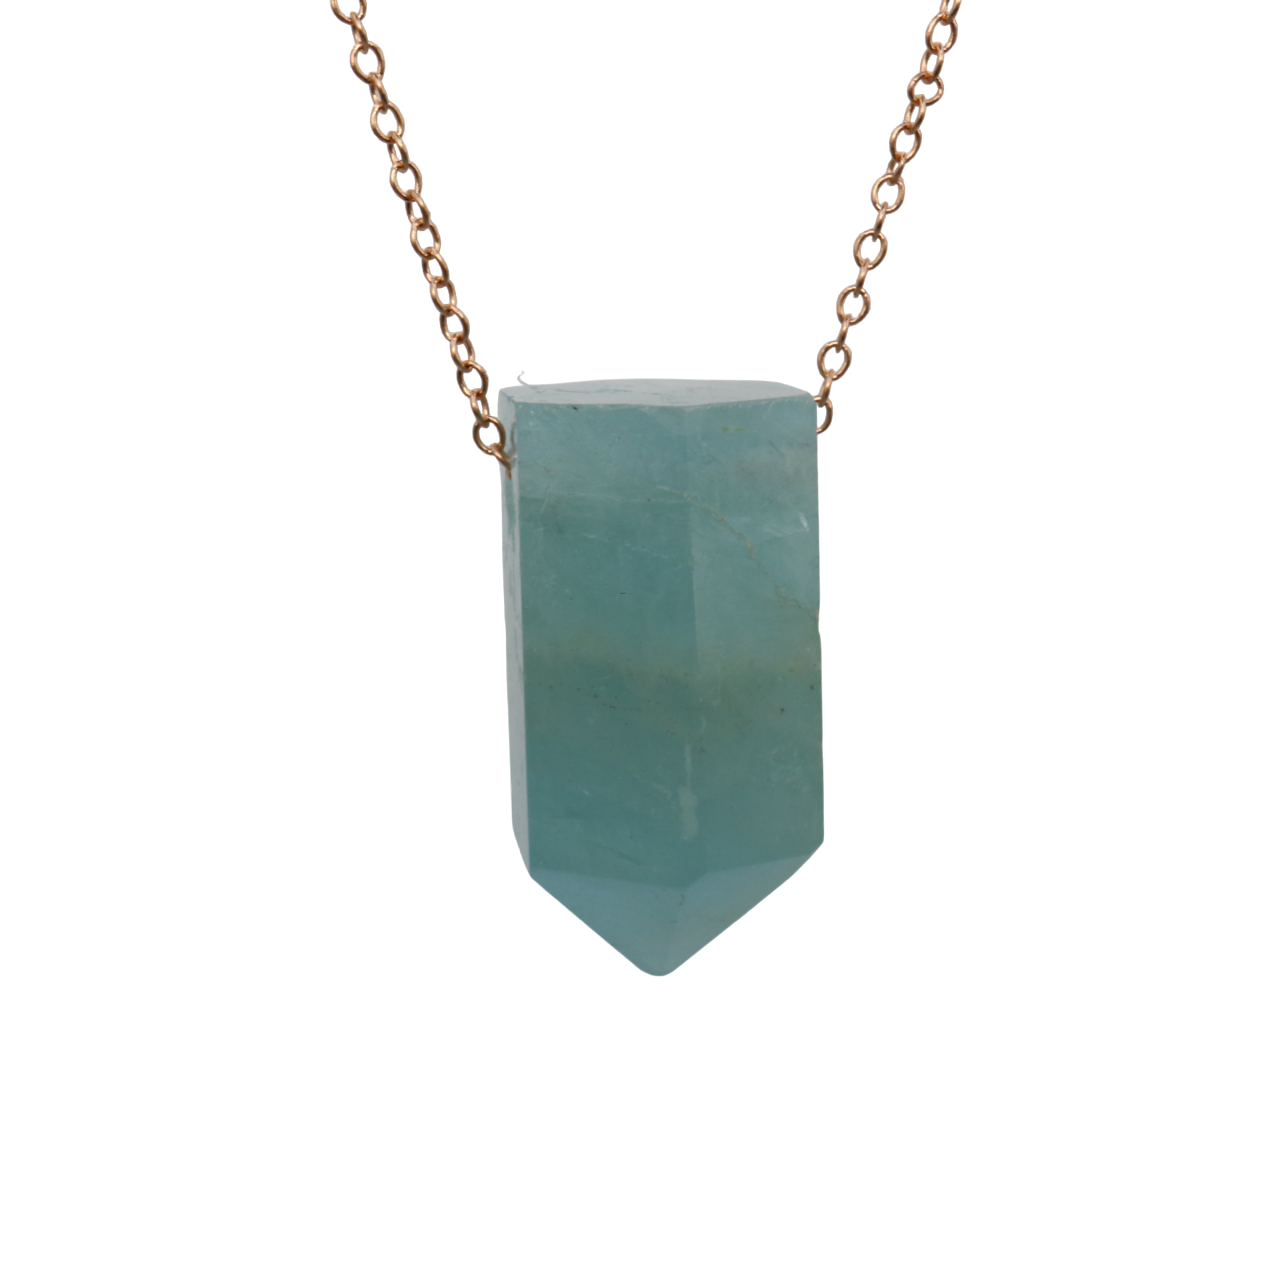 Aquamarine on a fine Rose Gold plated 925 Sterling Silver chain